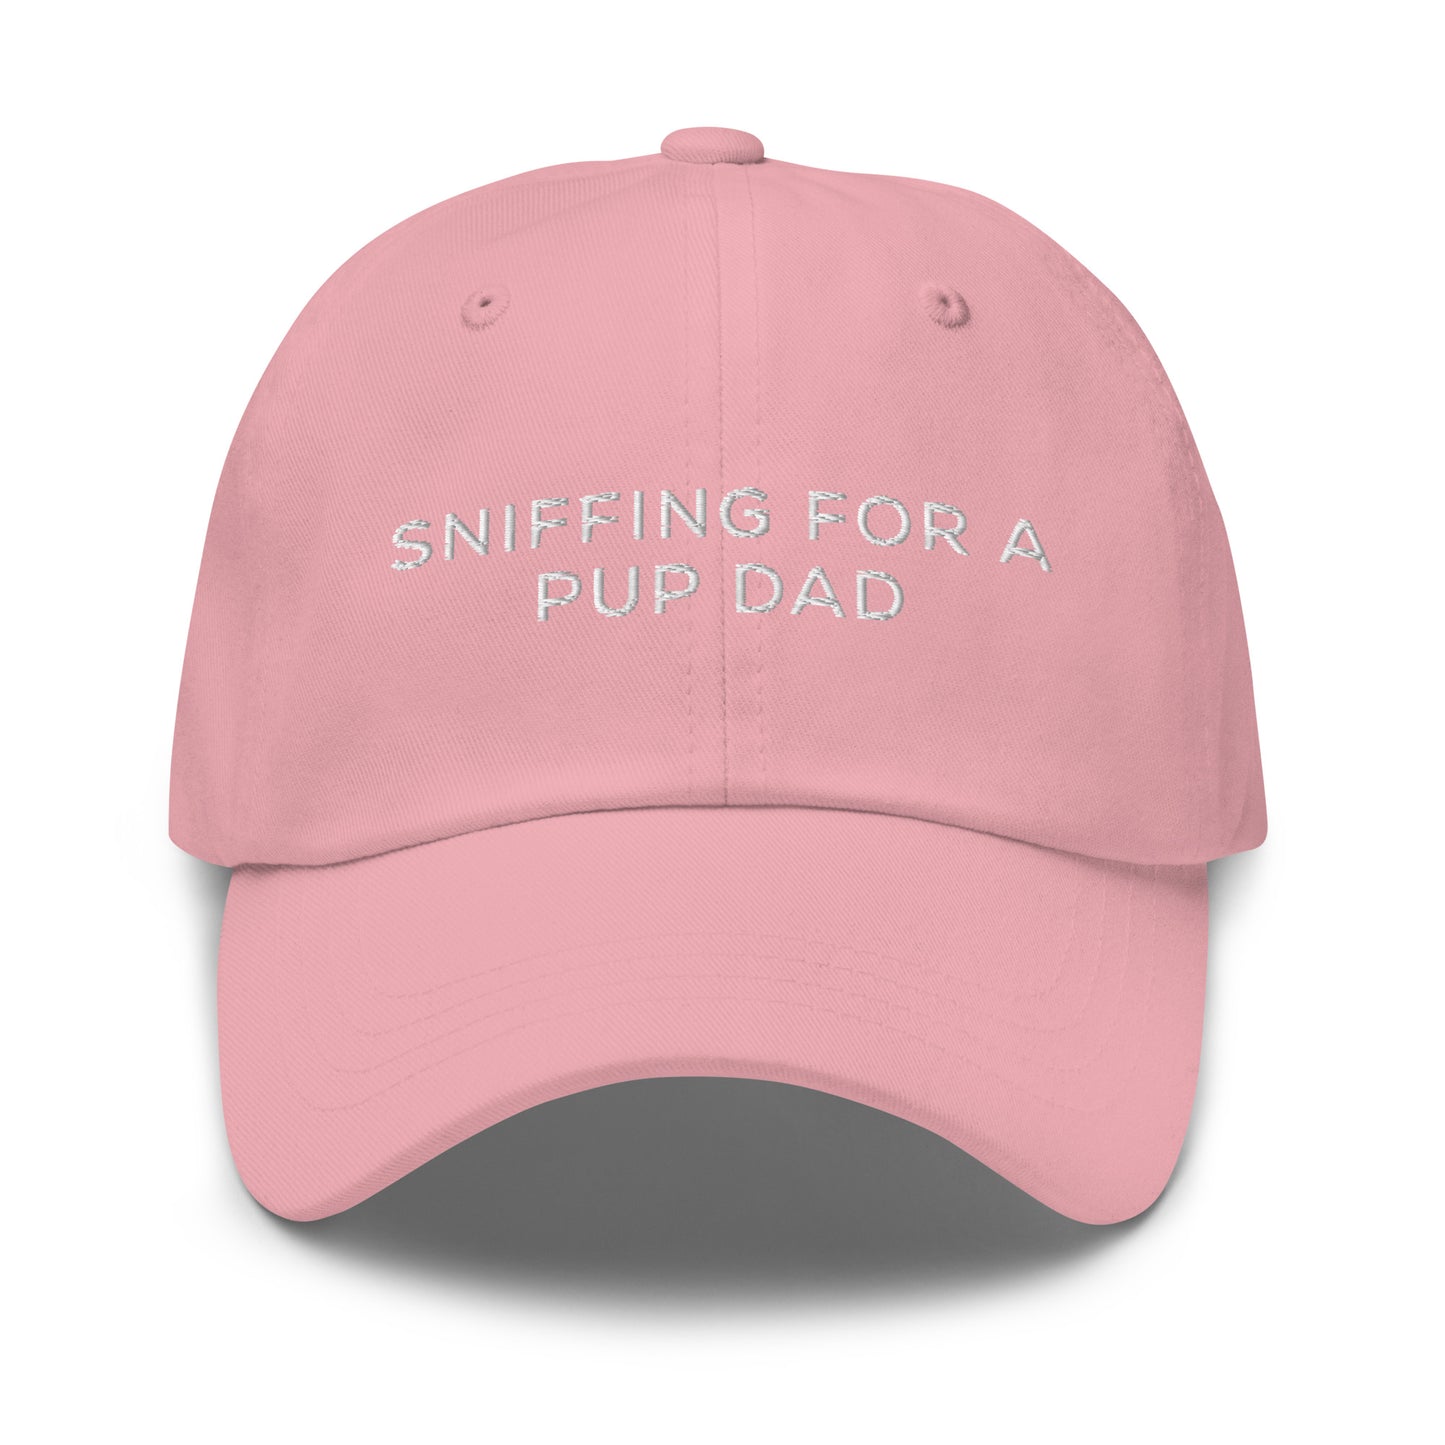 Sniffing for a Pup Dad hat